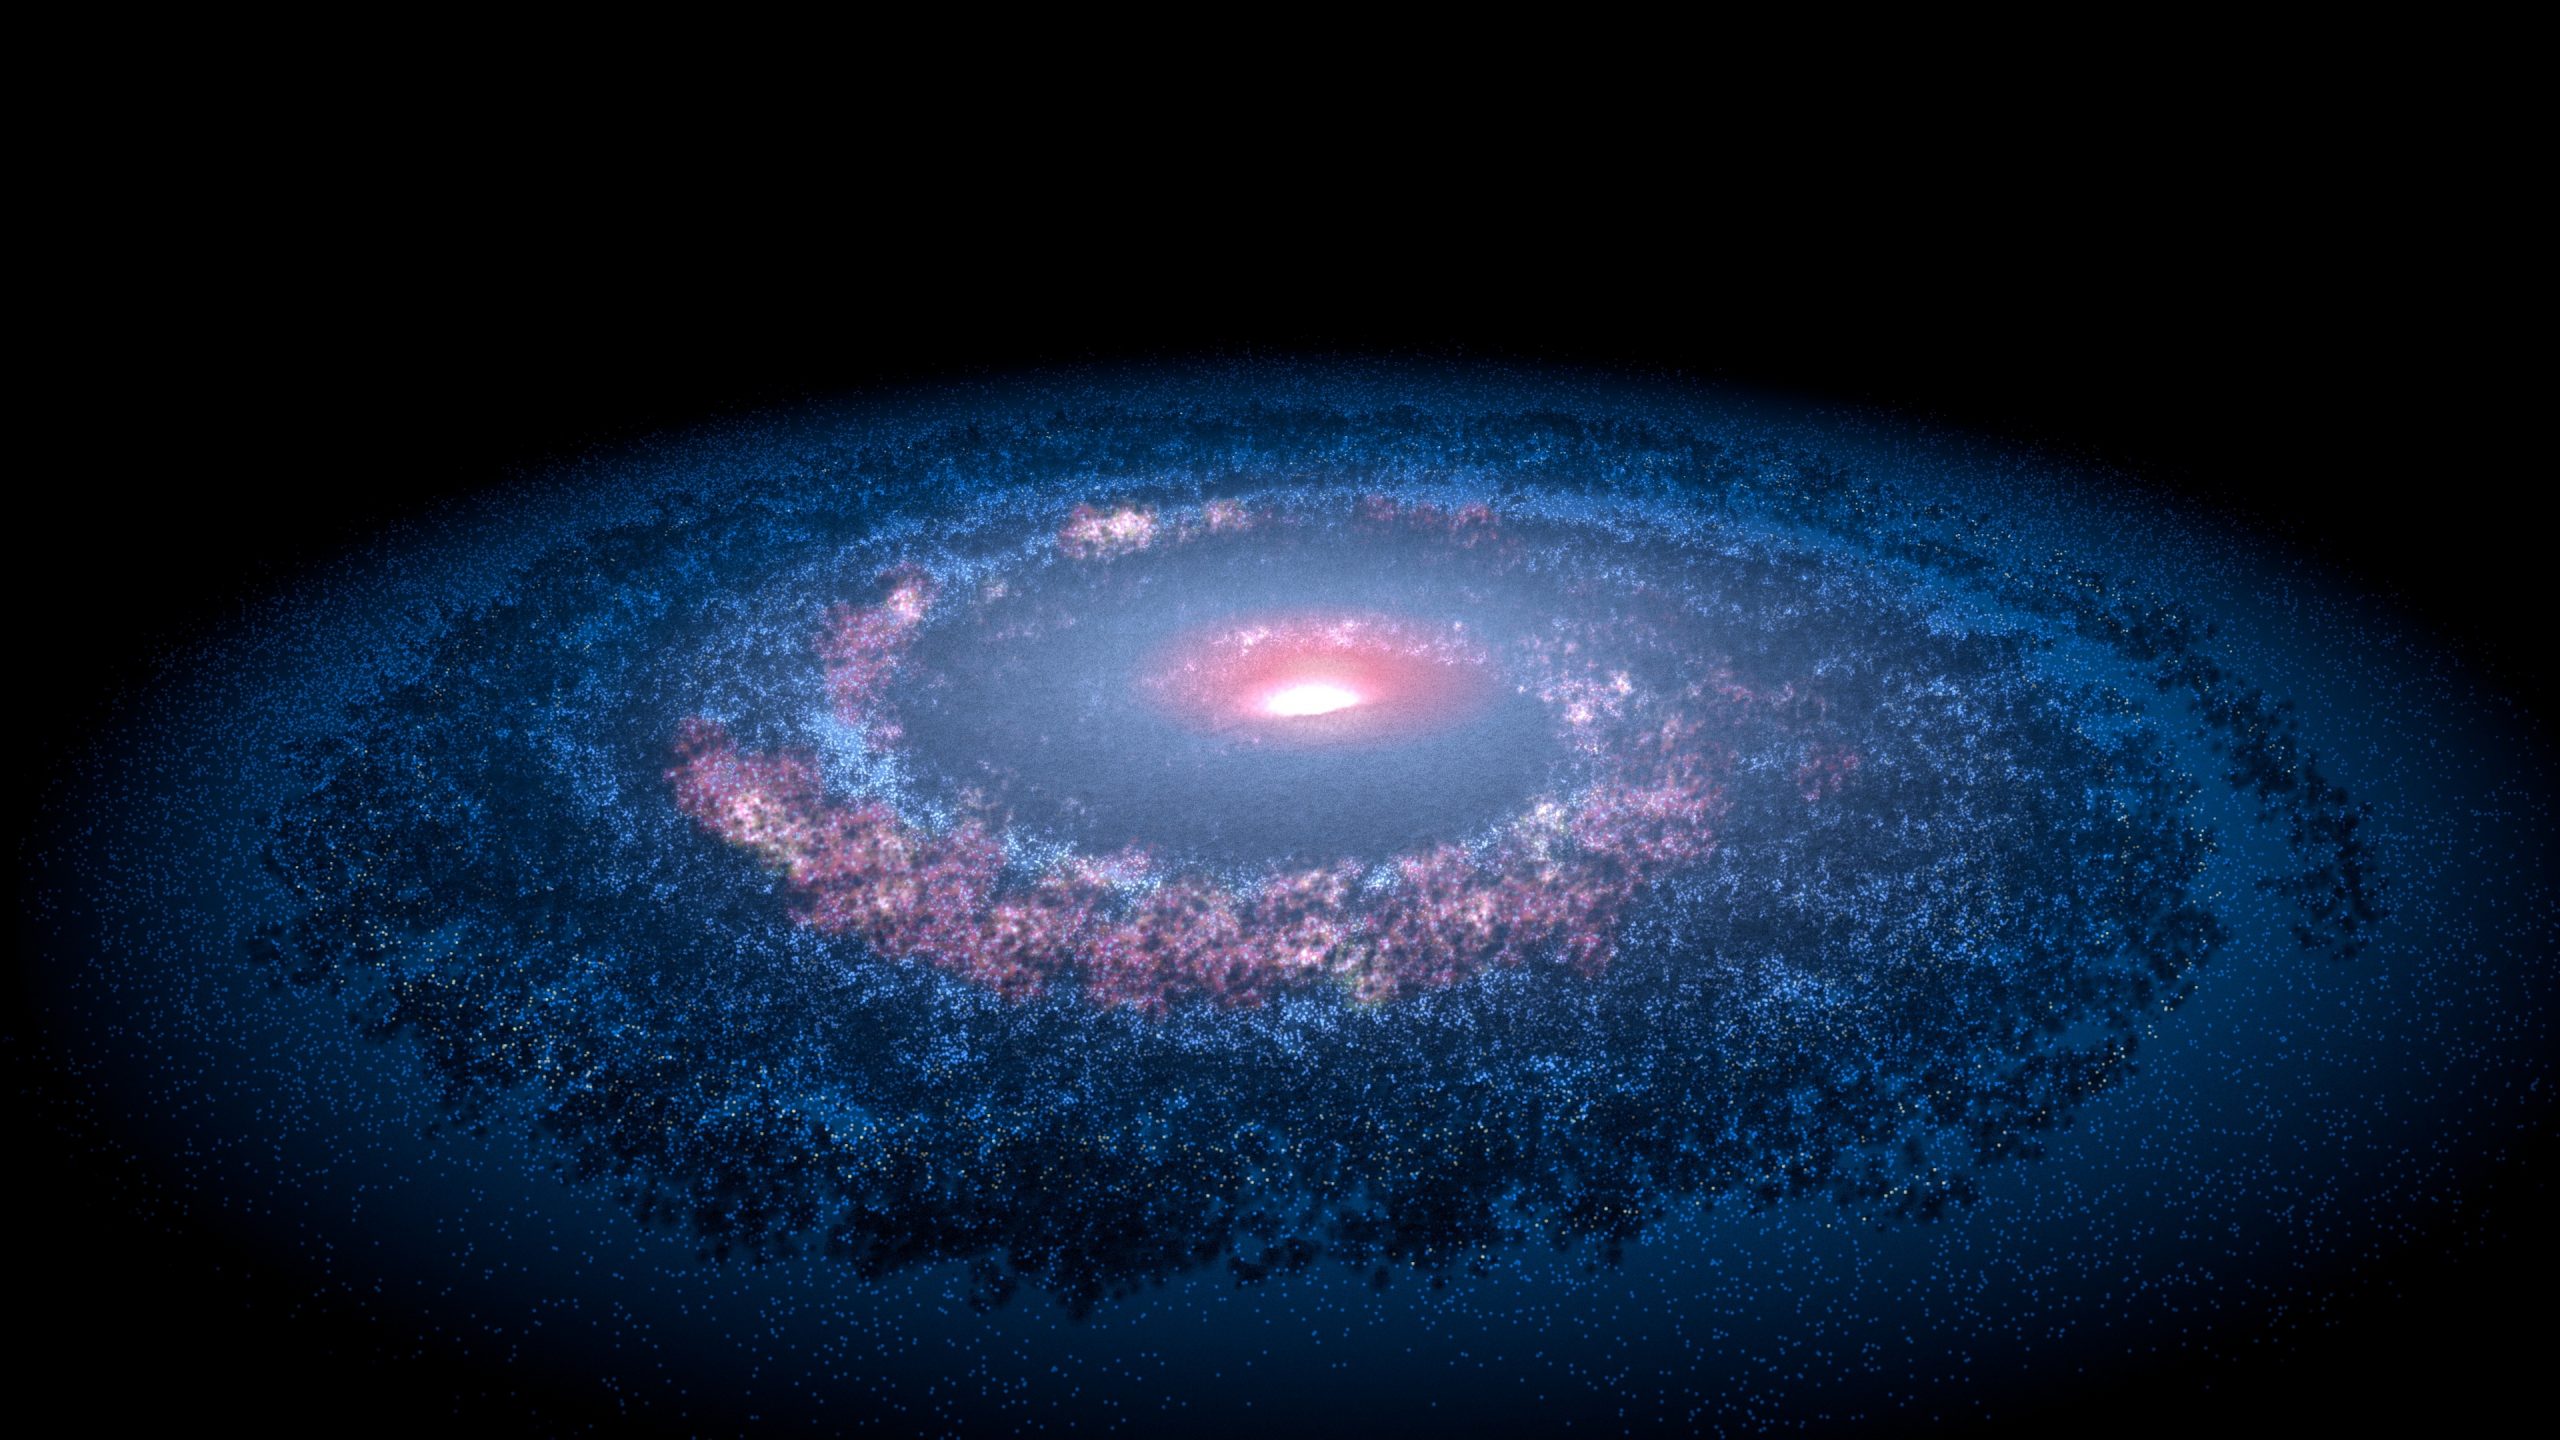 Our Milky Way Galaxy isn’t that special, reveals new data